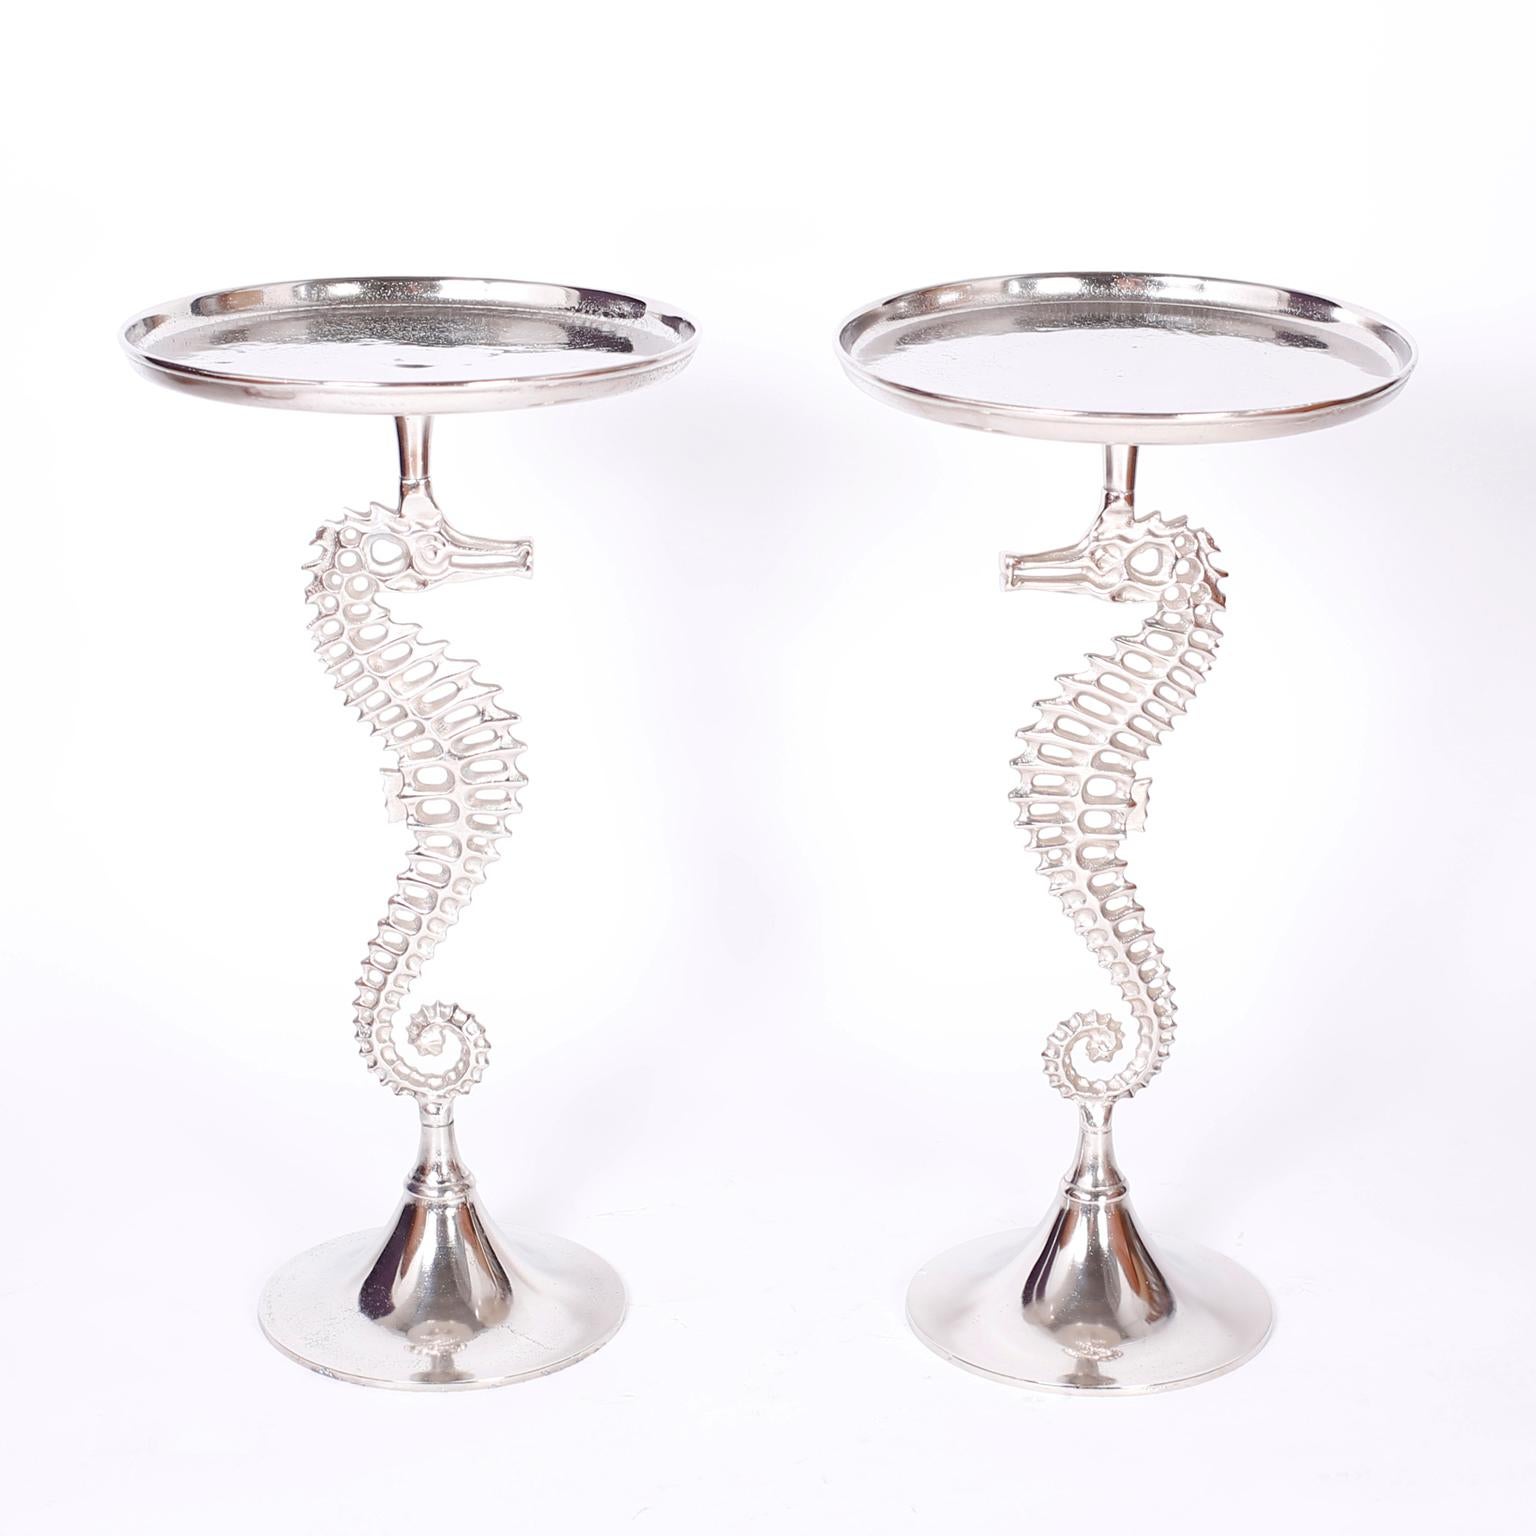 Pair of mid century stands or tables crafted in aluminum with a turned tray on the top supported by a seahorse with a stylized modern form on a turned round base.